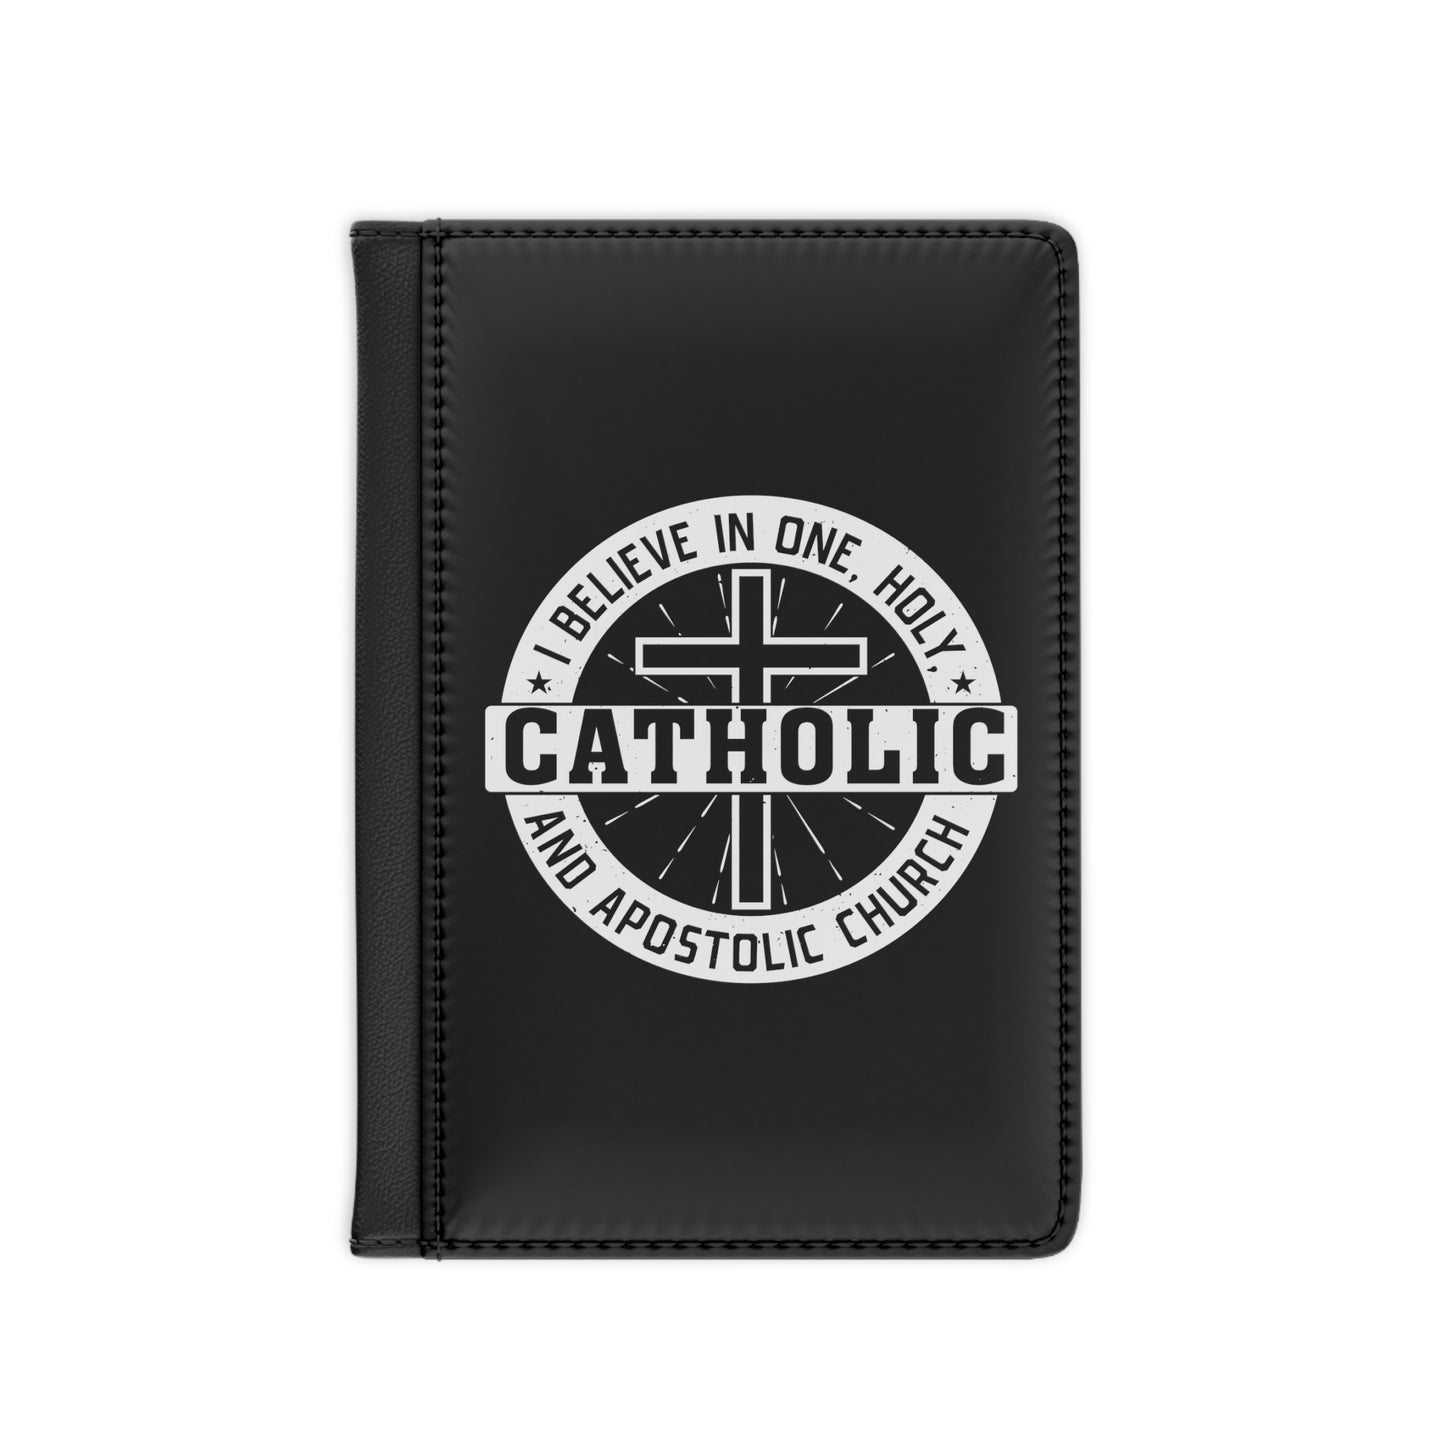 I Believe in One, Holy, Catholic and Apostolic Church Passport Cover